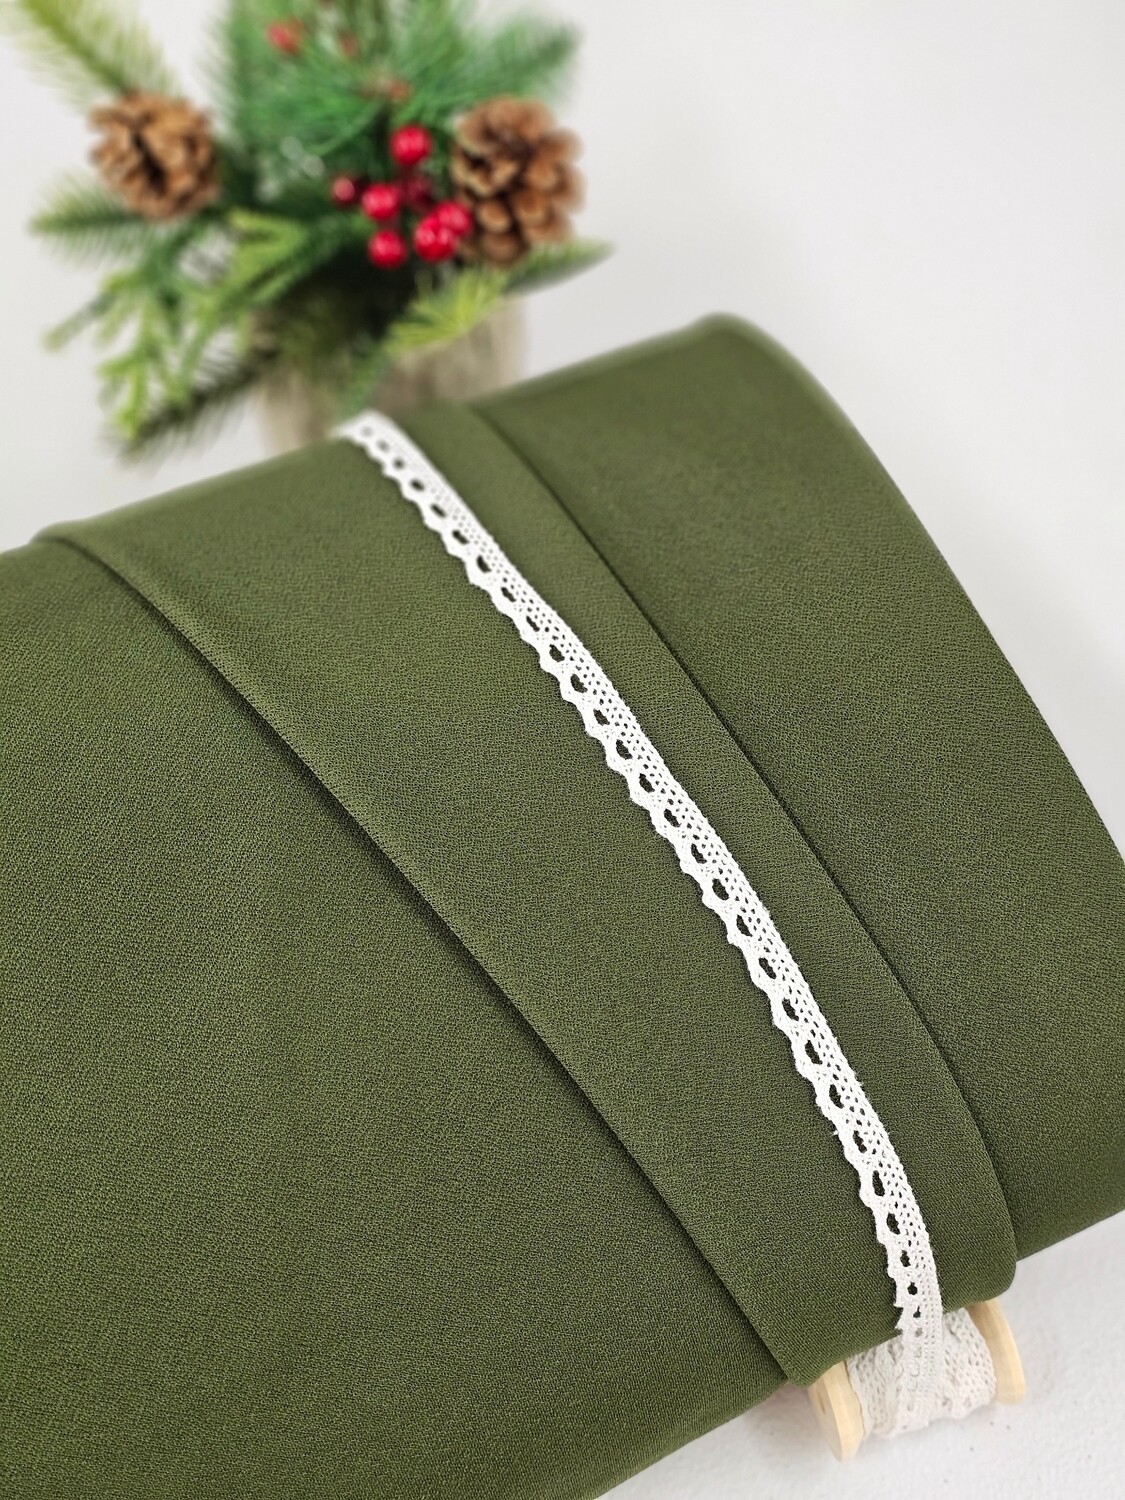 Crepe Knit Rifle Green